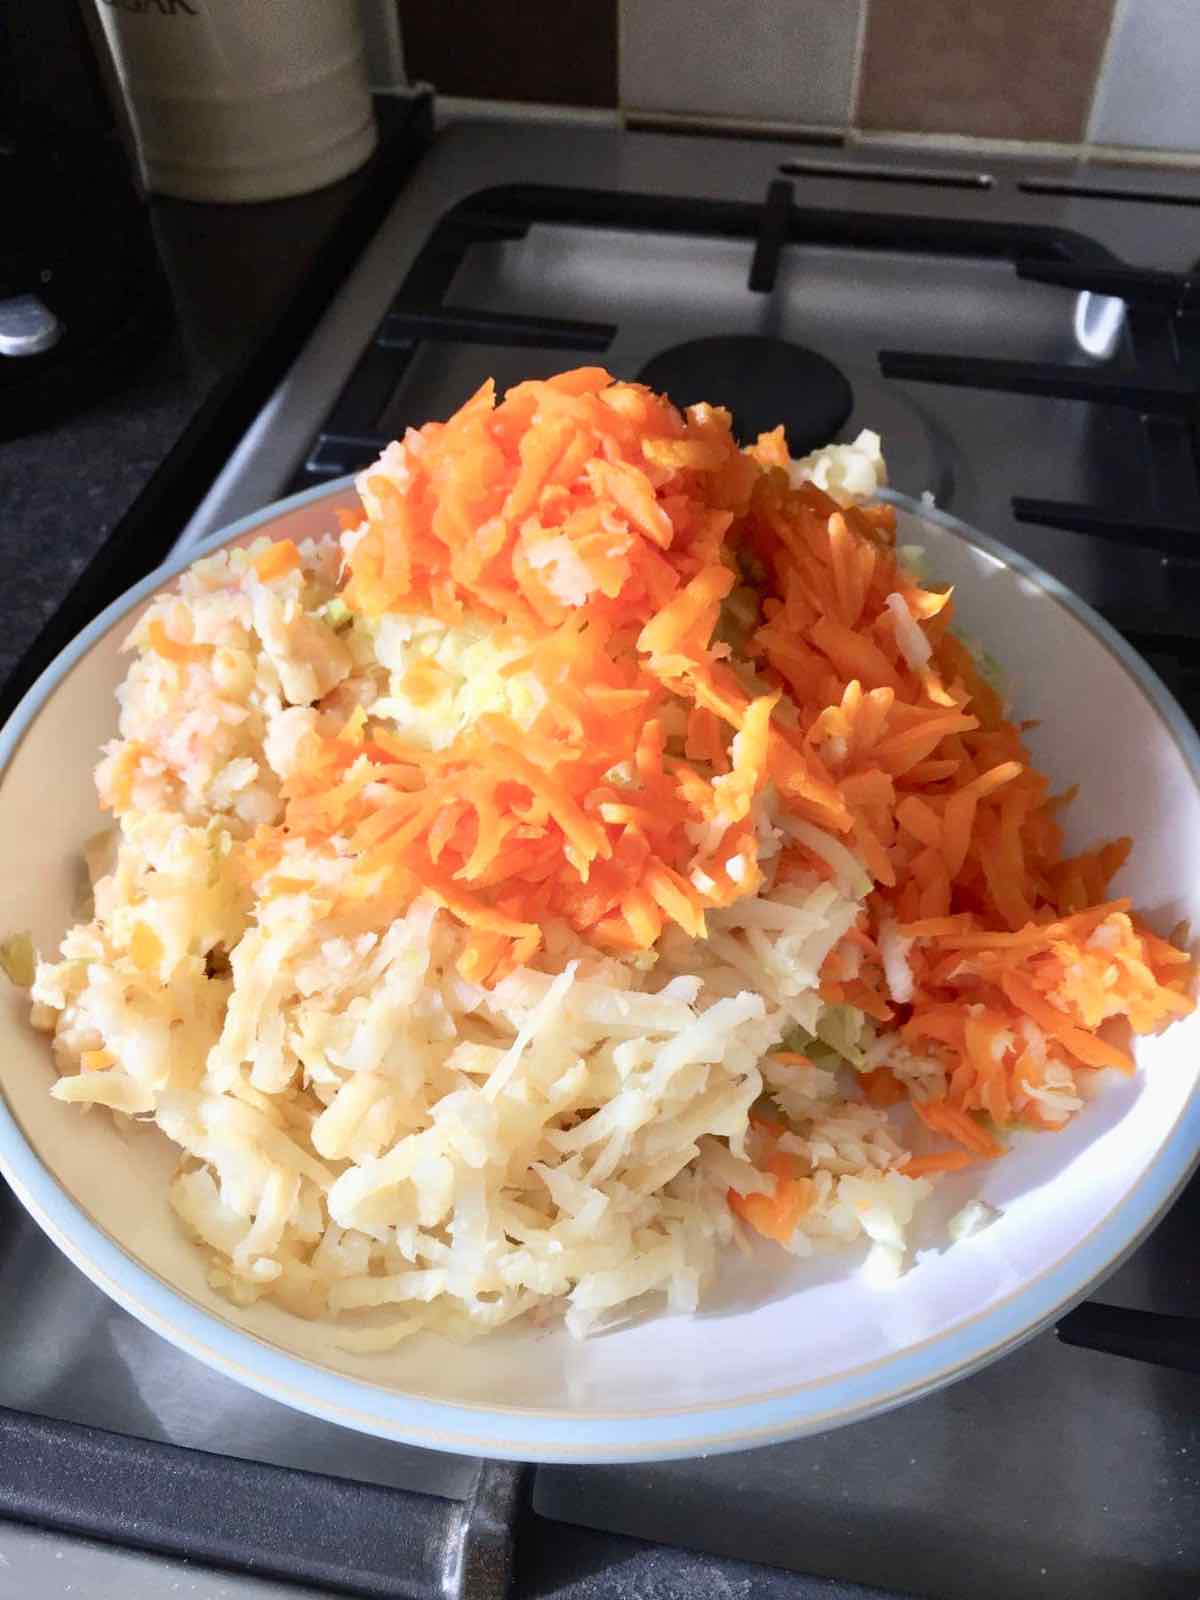 Cooked vegetables coarsely grated on a plate.